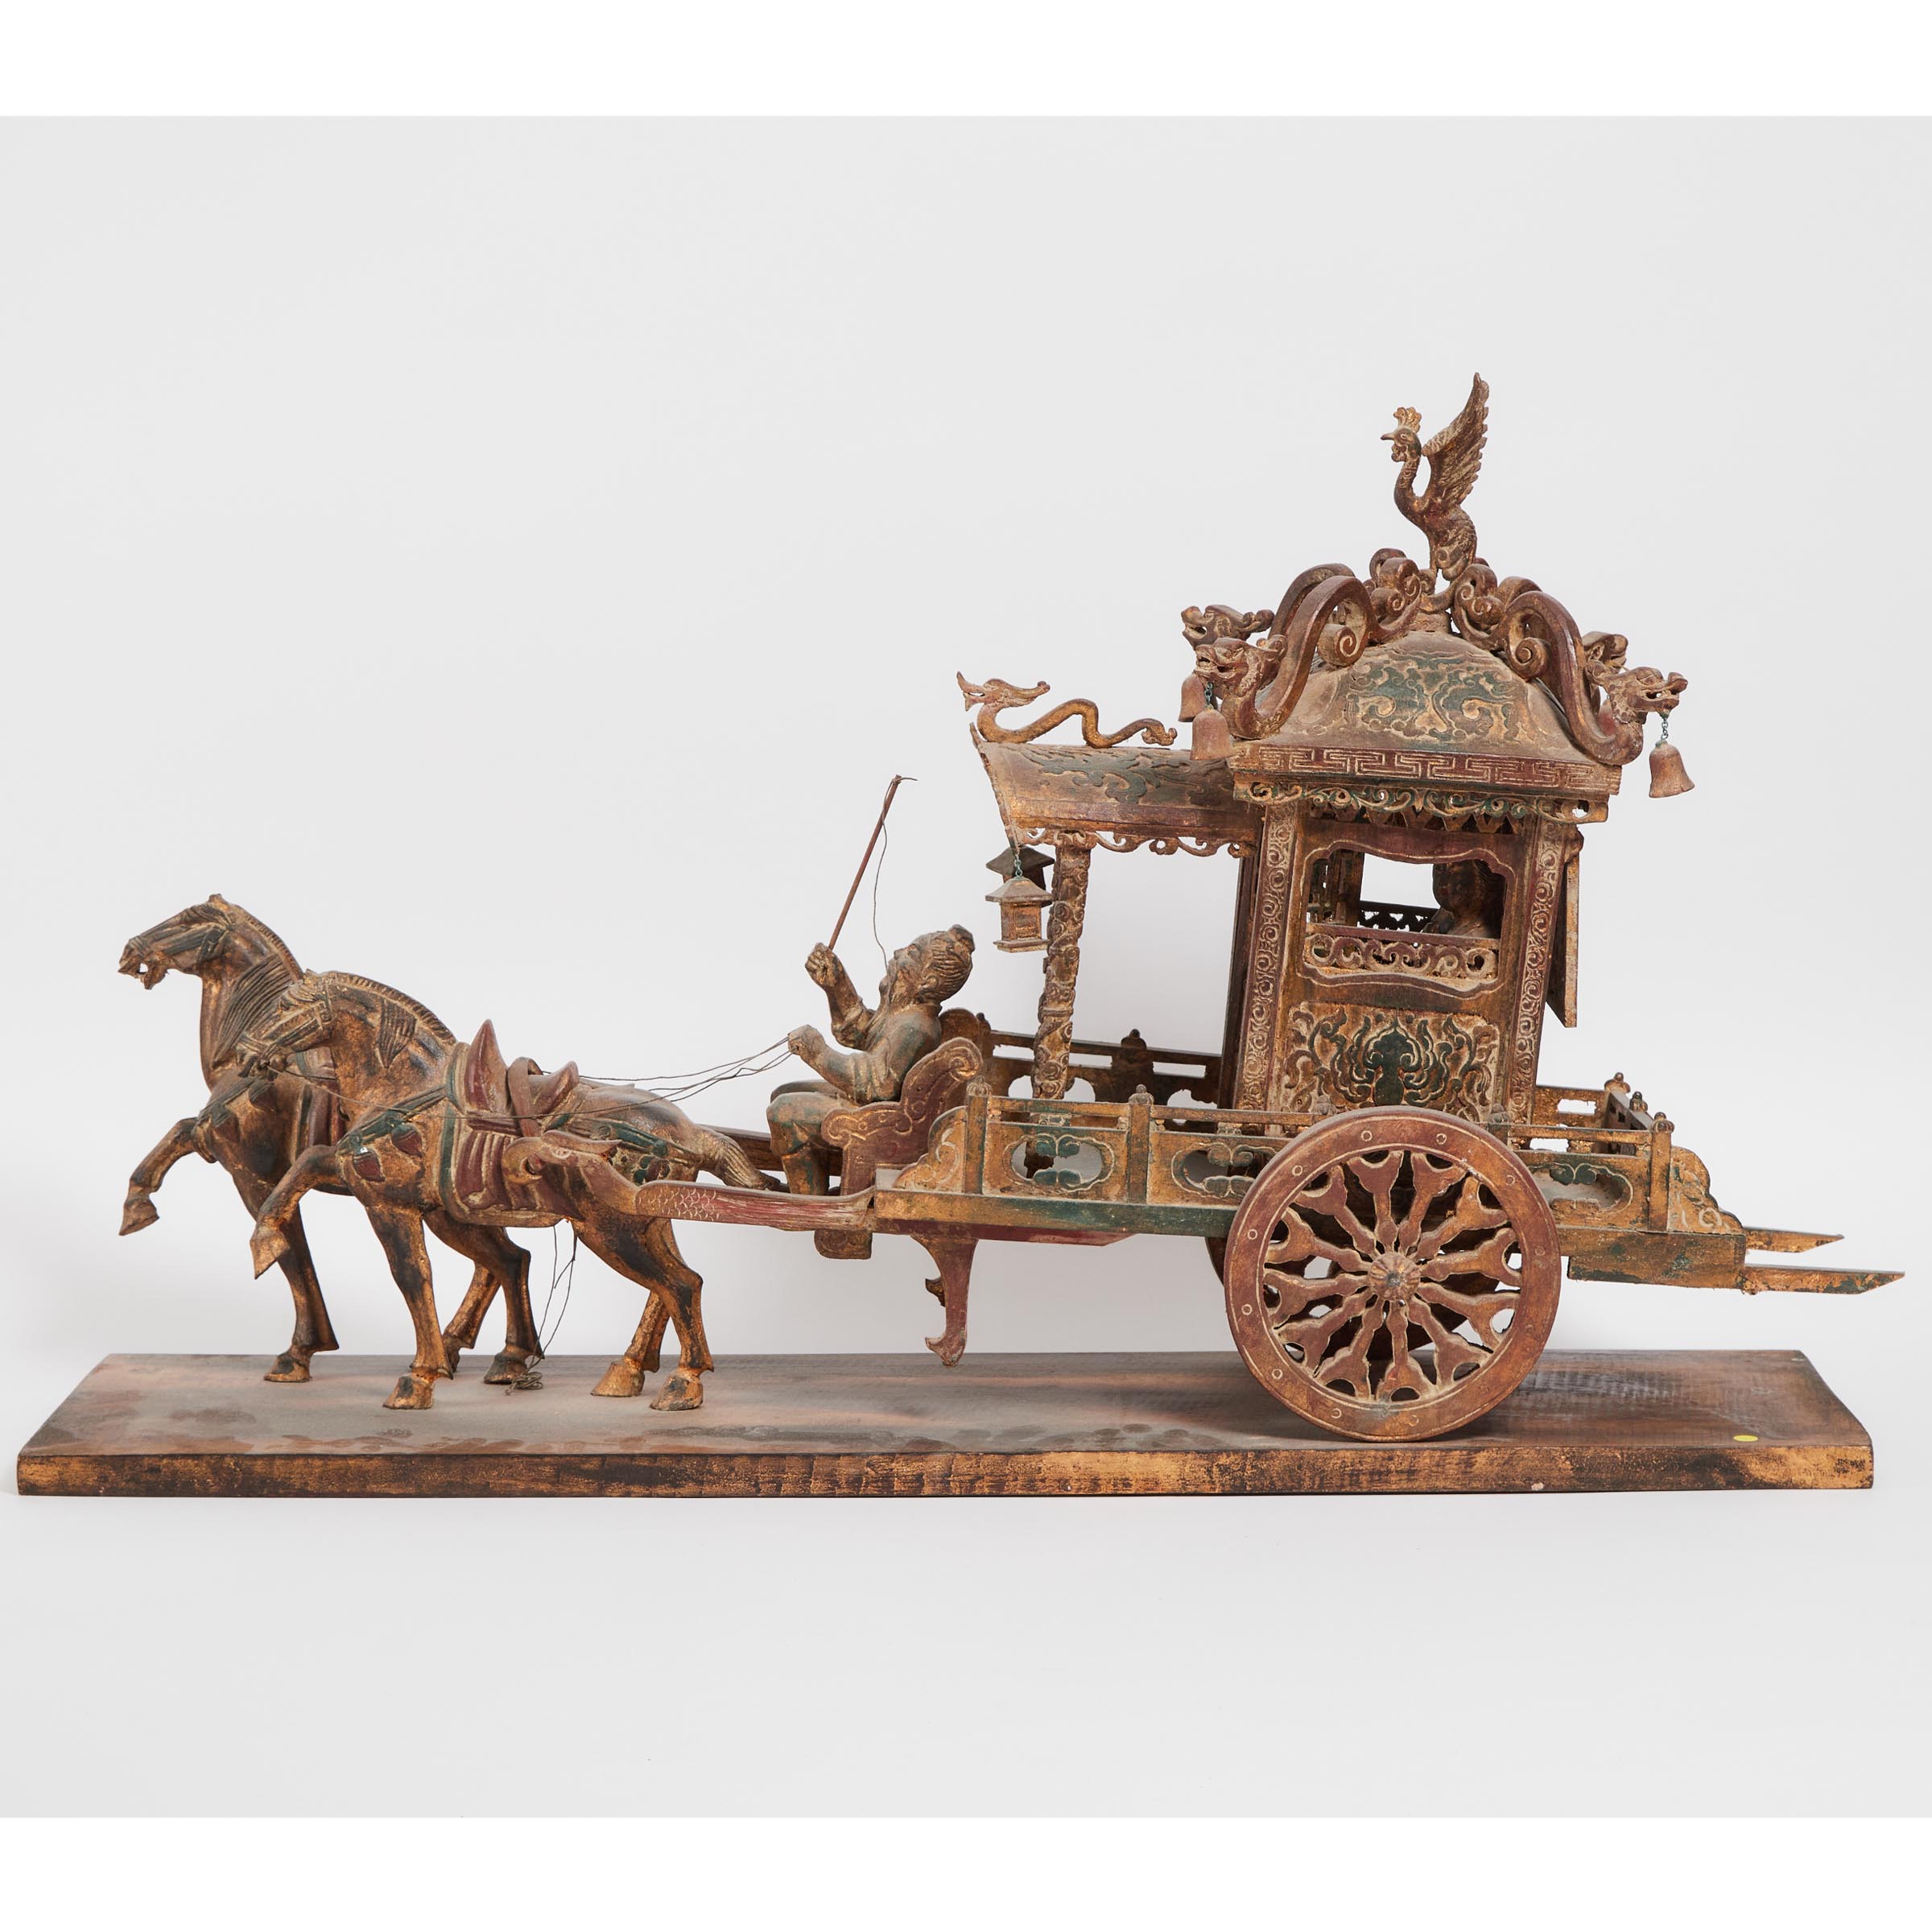 A Large Chinese Wood Model of a Chariot